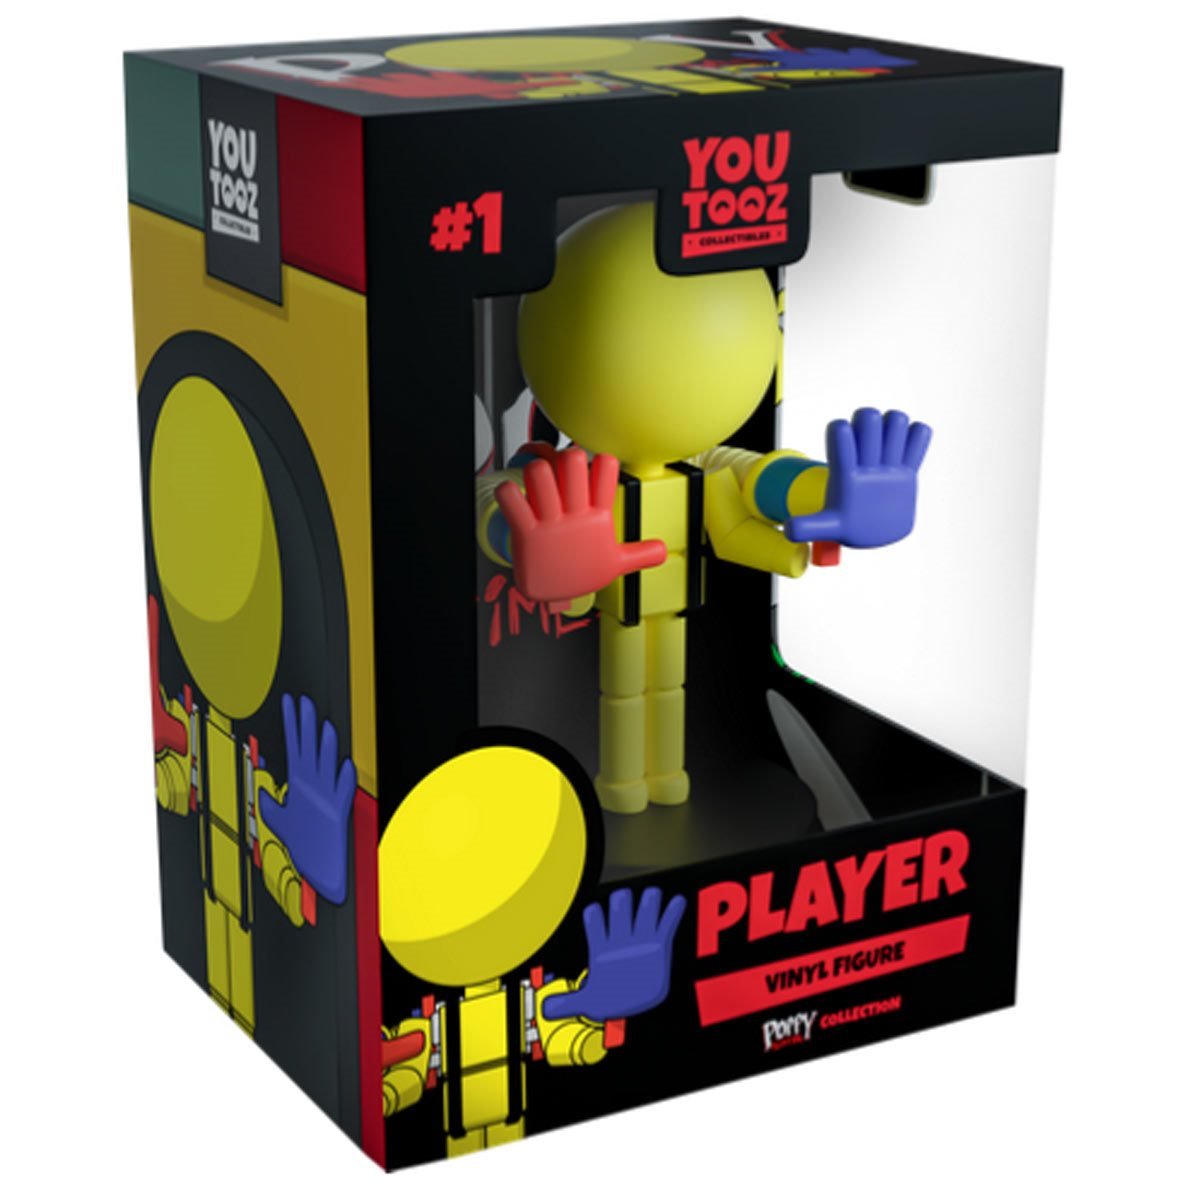 Poppy Playtime 12-Inch Action Figures 